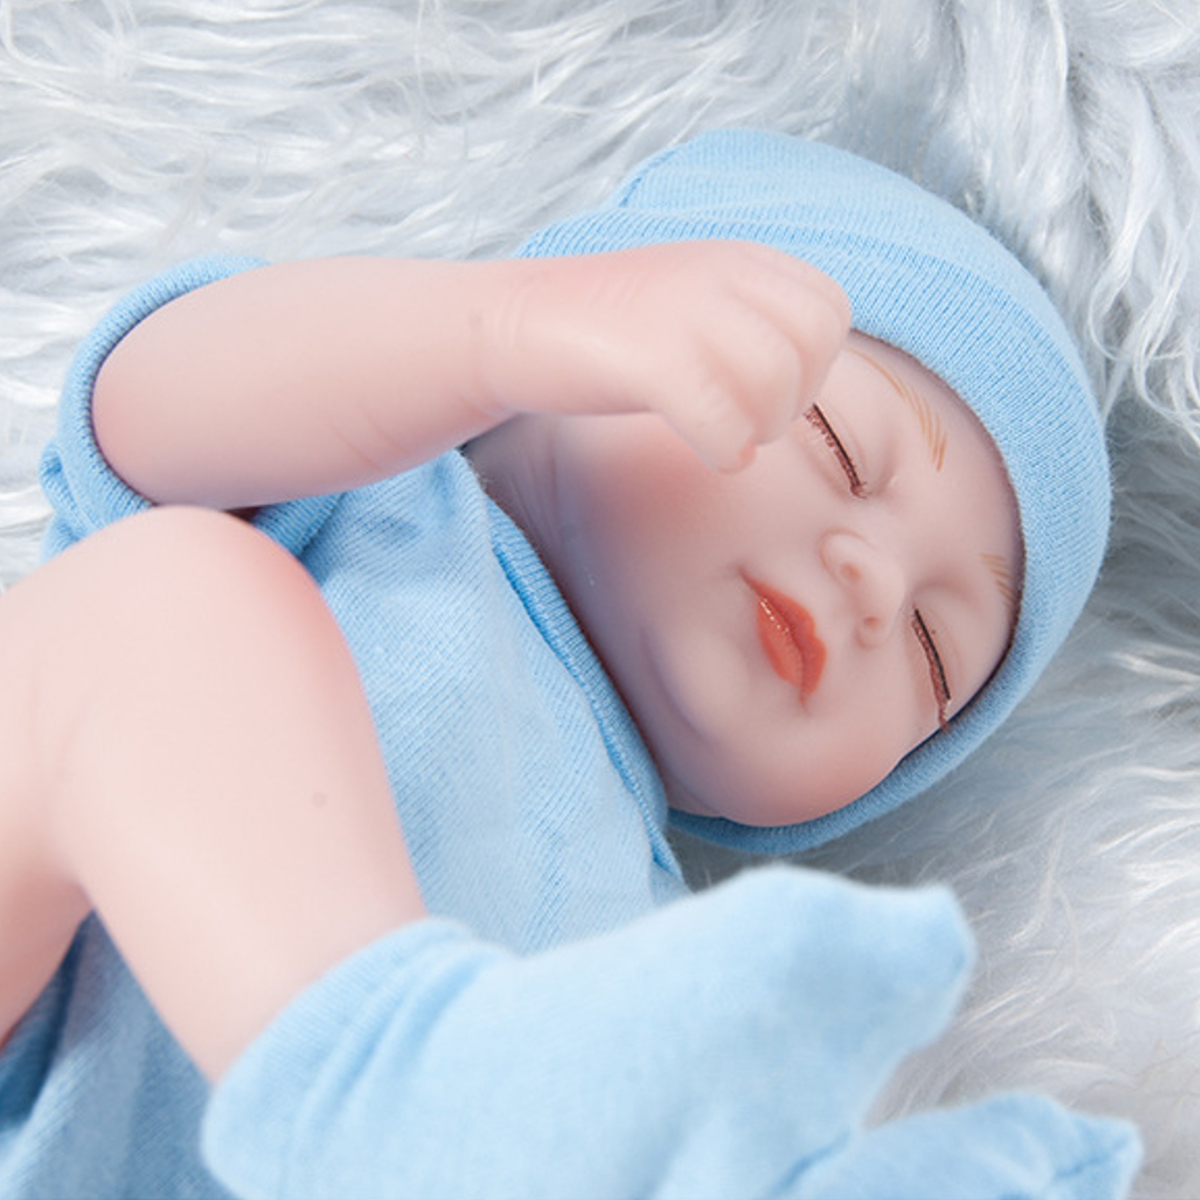 28CM-Soft-Silicone-Realistic-Sleeping-Reborns-Lifelikes-Newborns-Baby-Doll-Toy-with-Moveable-Head-Ar-1891375-7